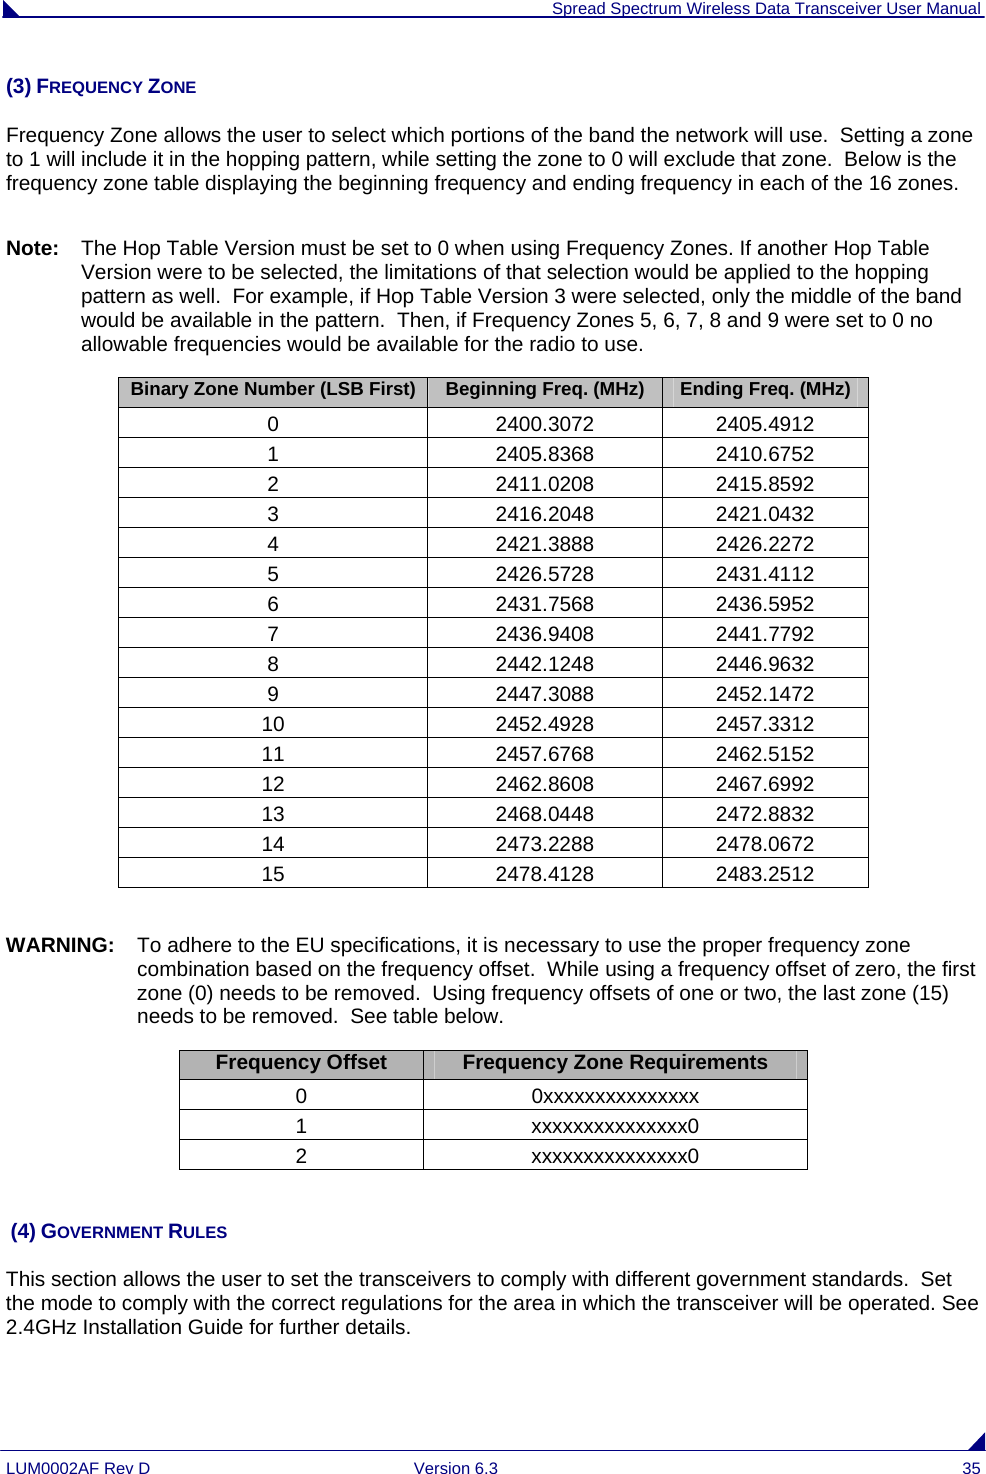  Spread Spectrum Wireless Data Transceiver User Manual LUM0002AF Rev D  Version 6.3  35 (3) FREQUENCY ZONE Frequency Zone allows the user to select which portions of the band the network will use.  Setting a zone to 1 will include it in the hopping pattern, while setting the zone to 0 will exclude that zone.  Below is the frequency zone table displaying the beginning frequency and ending frequency in each of the 16 zones.  Note:   The Hop Table Version must be set to 0 when using Frequency Zones. If another Hop Table Version were to be selected, the limitations of that selection would be applied to the hopping pattern as well.  For example, if Hop Table Version 3 were selected, only the middle of the band would be available in the pattern.  Then, if Frequency Zones 5, 6, 7, 8 and 9 were set to 0 no allowable frequencies would be available for the radio to use. Binary Zone Number (LSB First) Beginning Freq. (MHz) Ending Freq. (MHz) 0 2400.3072 2405.4912 1 2405.8368 2410.6752 2 2411.0208 2415.8592 3 2416.2048 2421.0432 4 2421.3888 2426.2272 5 2426.5728 2431.4112 6 2431.7568 2436.5952 7 2436.9408 2441.7792 8 2442.1248 2446.9632 9 2447.3088 2452.1472 10 2452.4928 2457.3312 11 2457.6768 2462.5152 12 2462.8608 2467.6992 13 2468.0448 2472.8832 14 2473.2288 2478.0672 15 2478.4128 2483.2512  WARNING:  To adhere to the EU specifications, it is necessary to use the proper frequency zone combination based on the frequency offset.  While using a frequency offset of zero, the first zone (0) needs to be removed.  Using frequency offsets of one or two, the last zone (15) needs to be removed.  See table below.  Frequency Offset  Frequency Zone Requirements 0 0xxxxxxxxxxxxxxx 1 xxxxxxxxxxxxxxx0 2 xxxxxxxxxxxxxxx0    (4) GOVERNMENT RULES This section allows the user to set the transceivers to comply with different government standards.  Set the mode to comply with the correct regulations for the area in which the transceiver will be operated. See 2.4GHz Installation Guide for further details. 